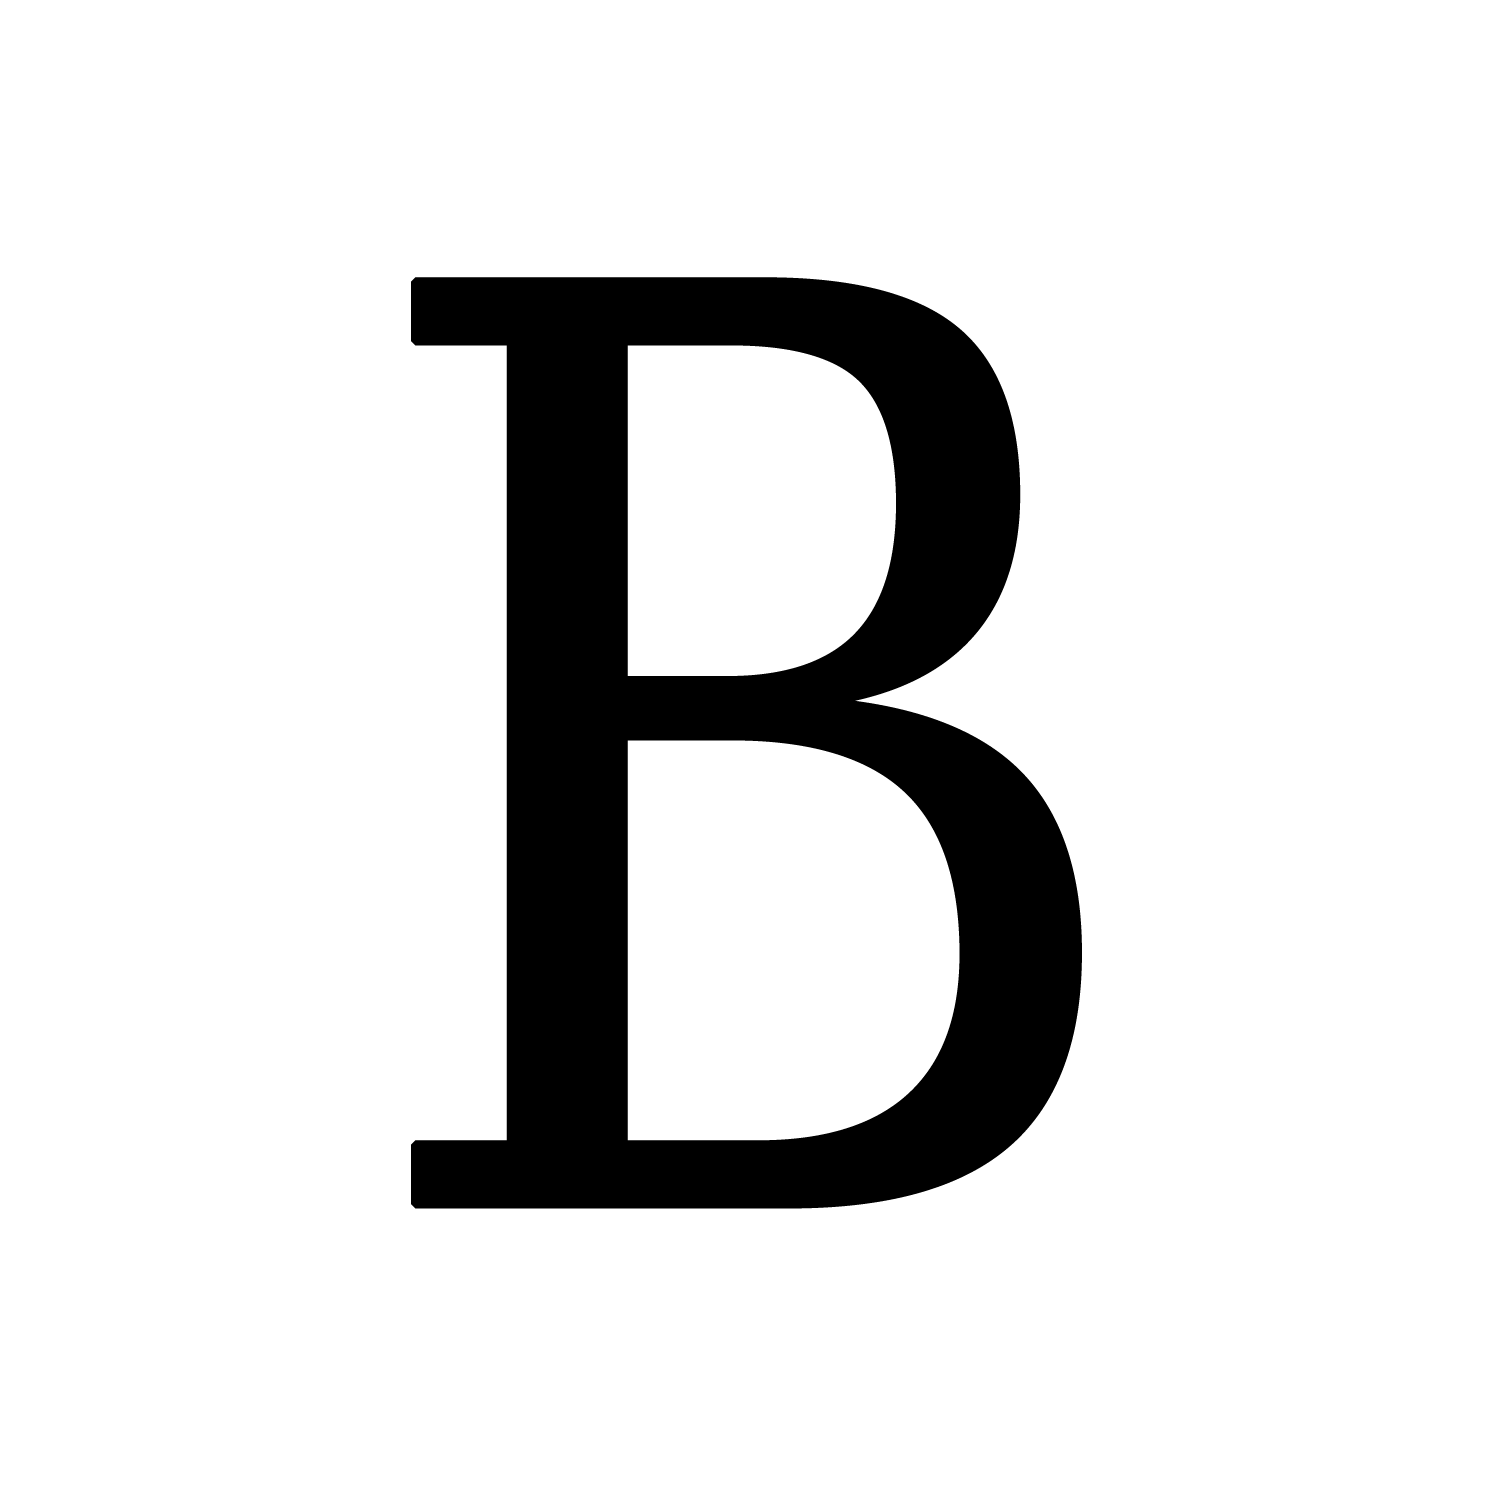 Letter B with Crown Logo - letter b png.fullring.co